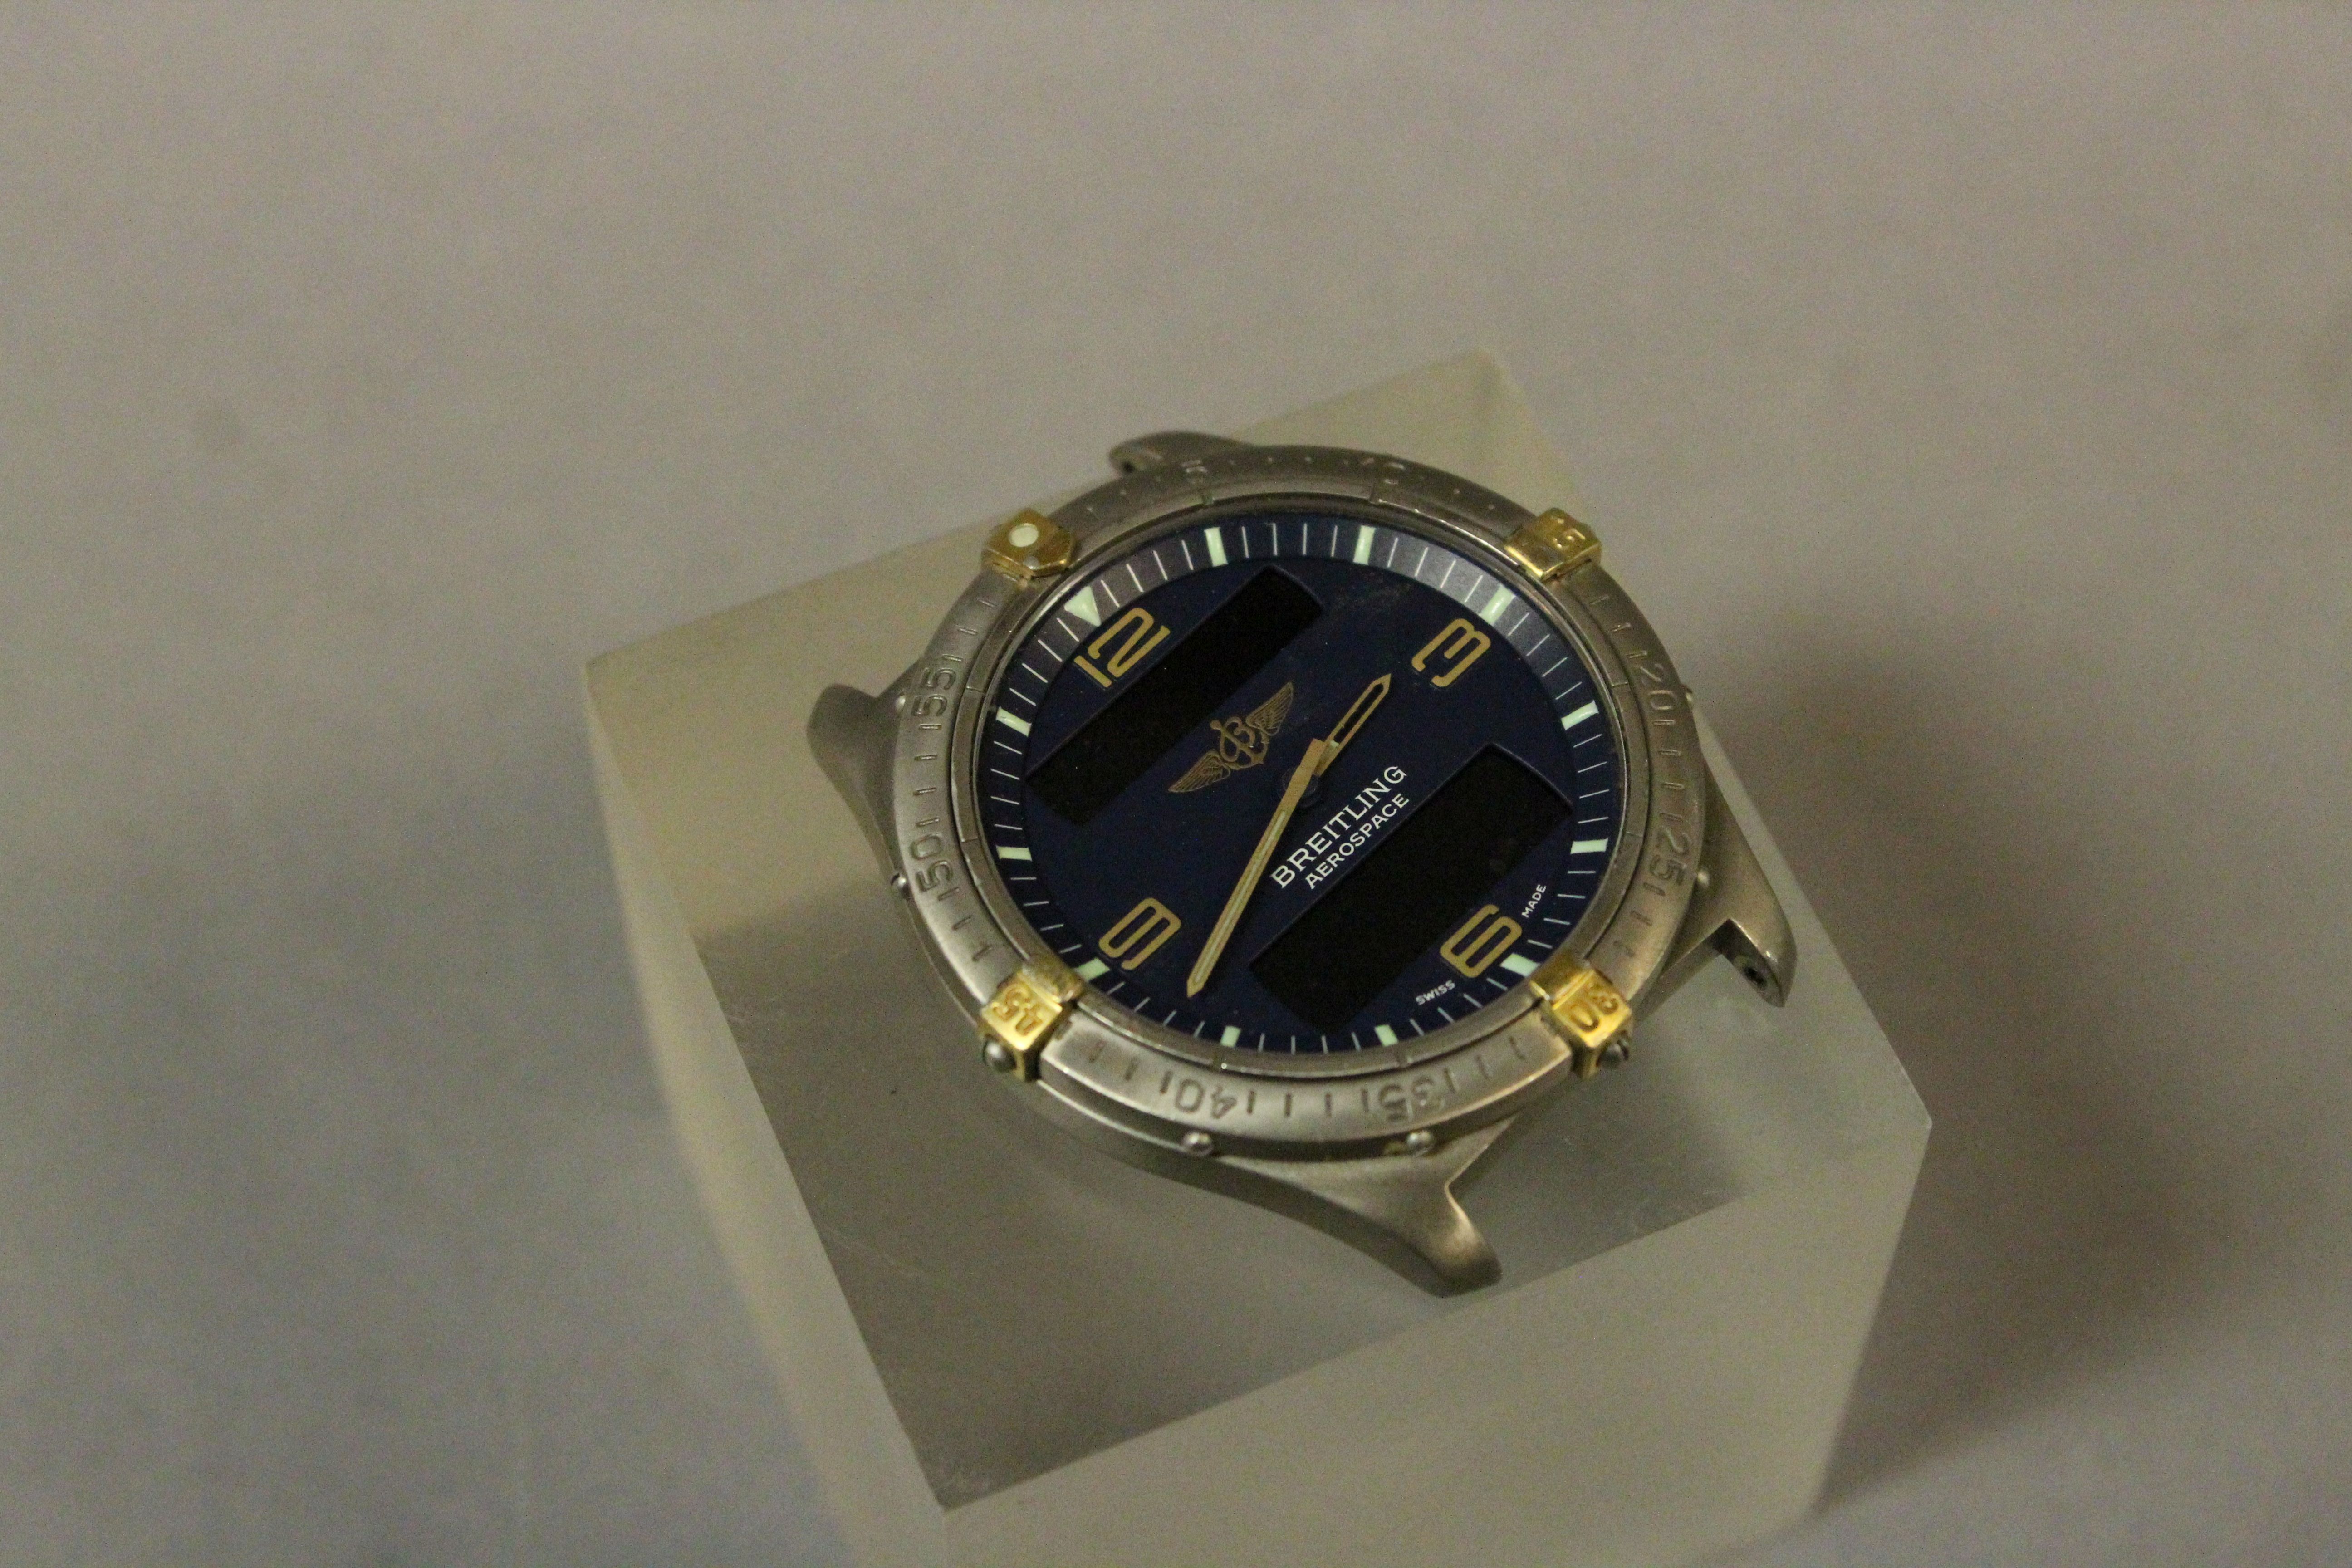 Gents Breitling Aerospace with a blue face, lacking strap